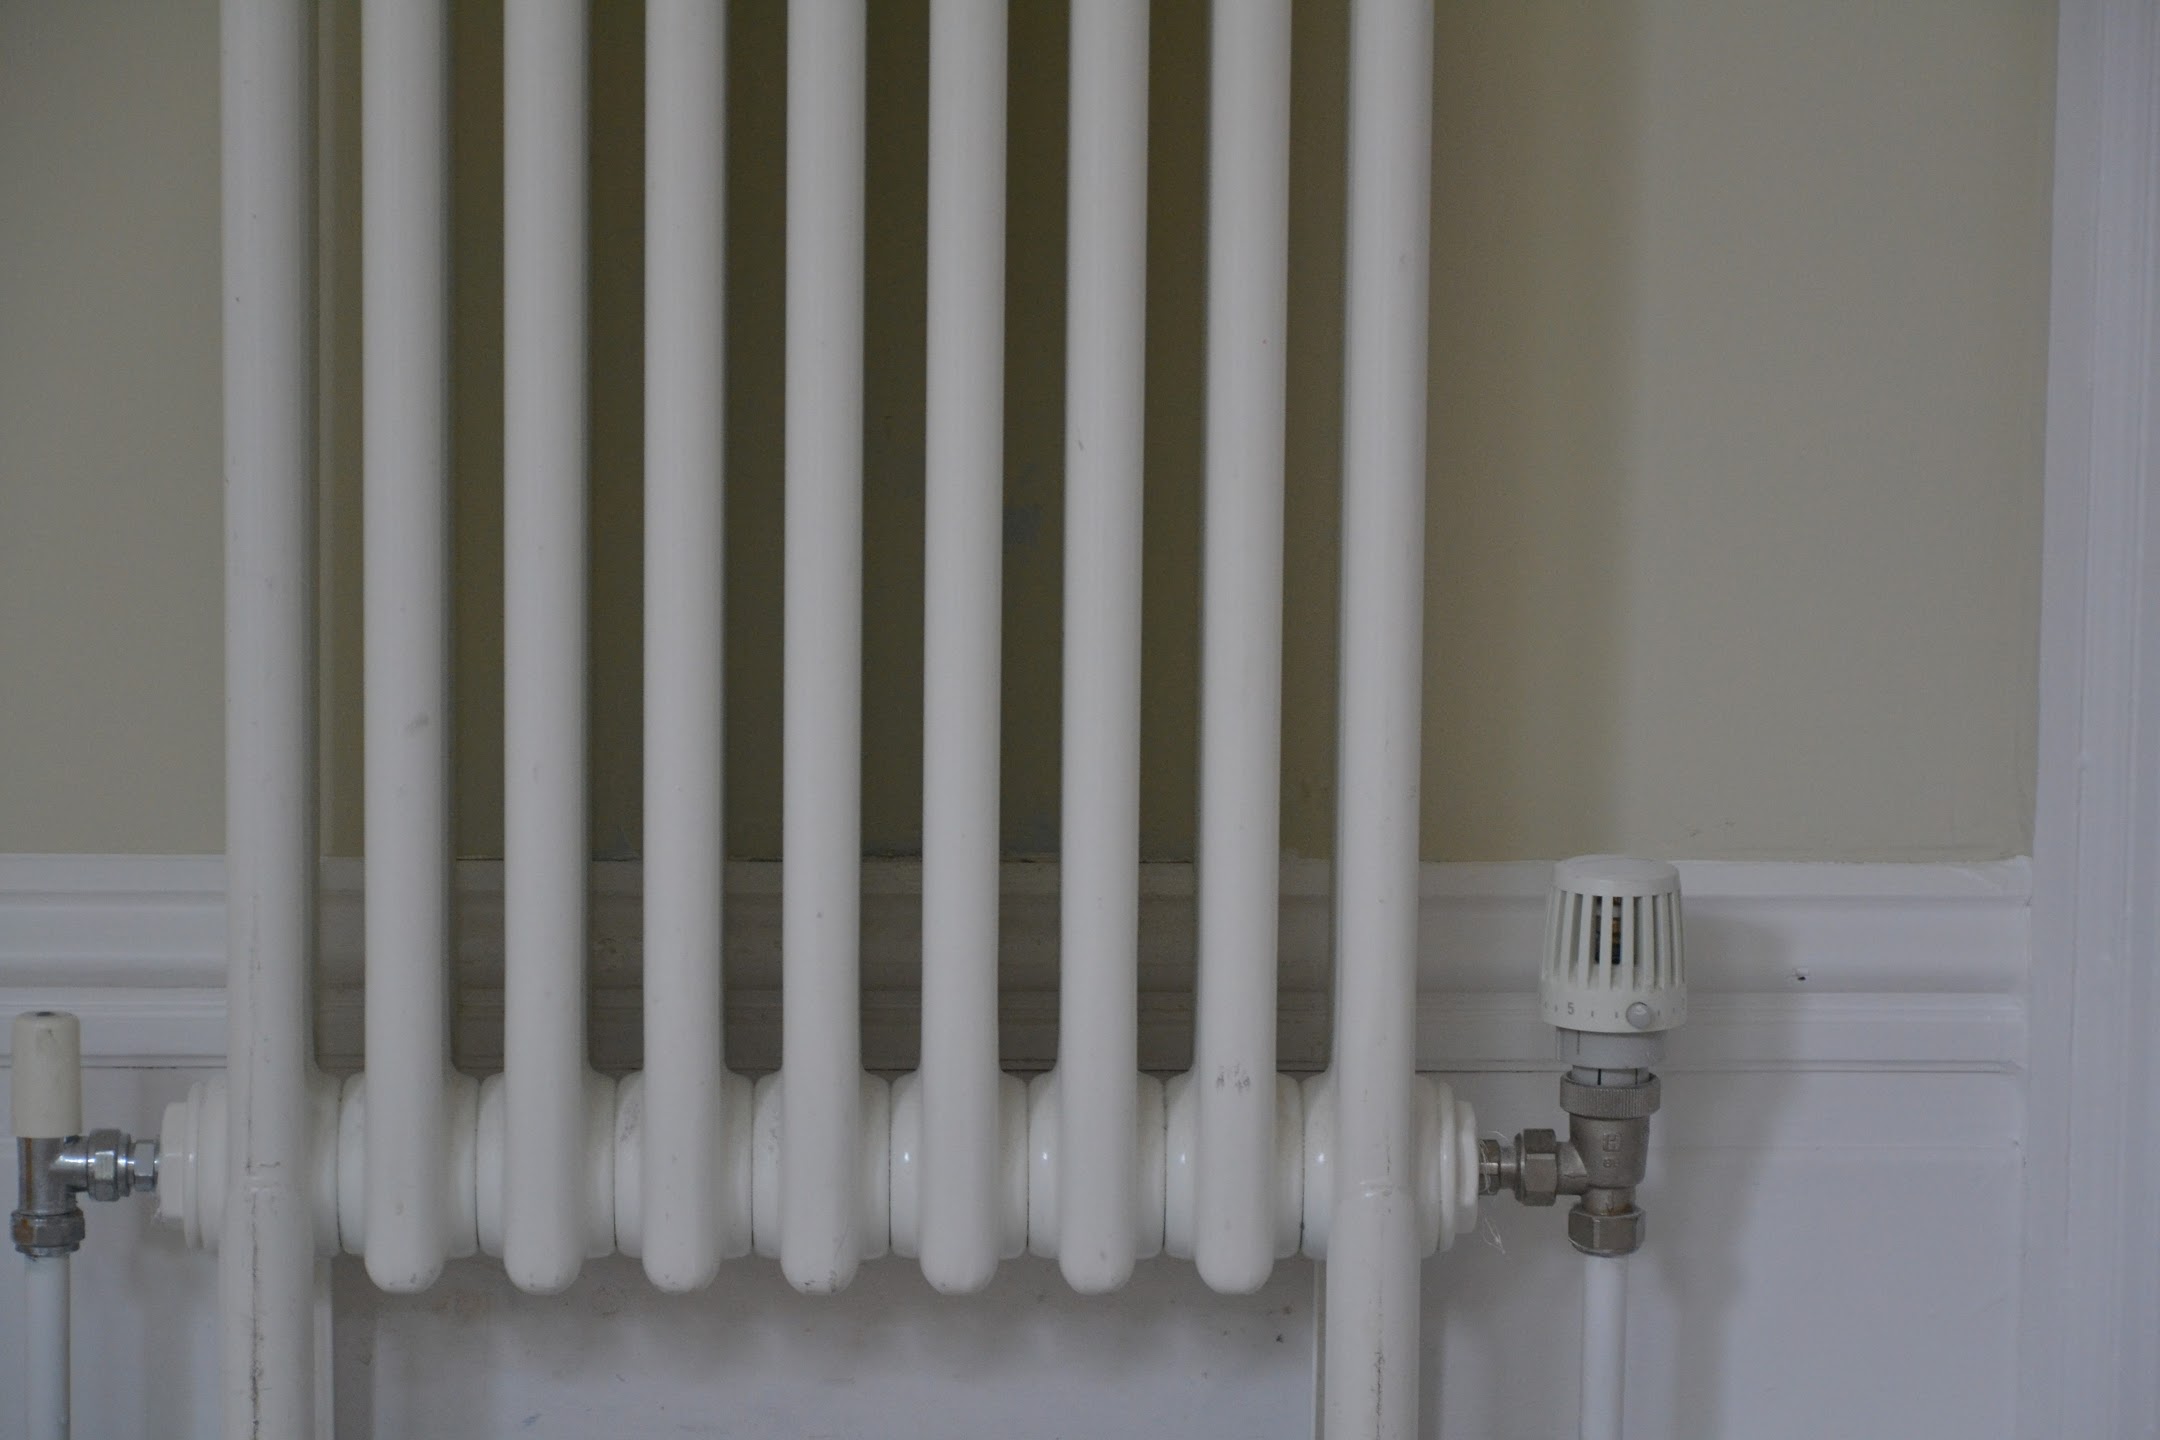 How to paint the radiator